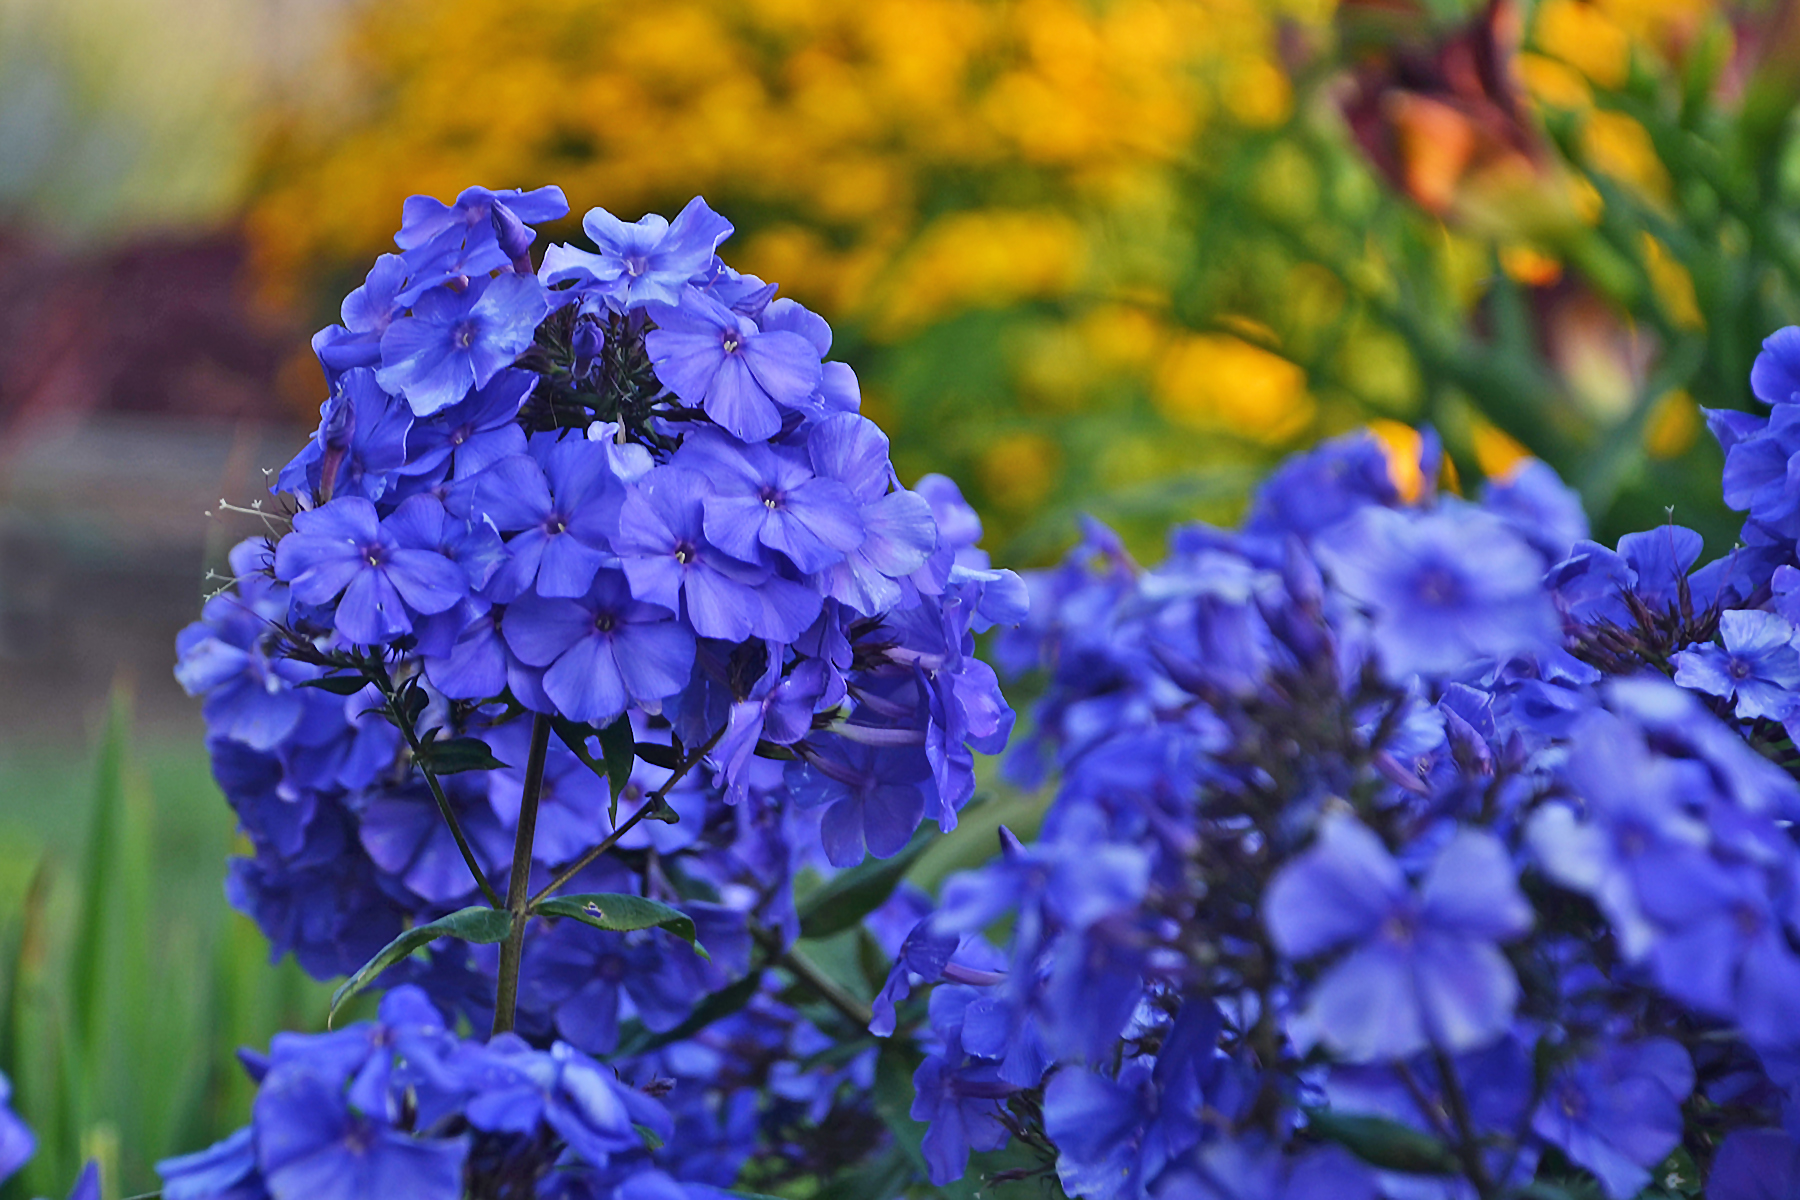 Image of Blue garden phlox with a single flower in bloom